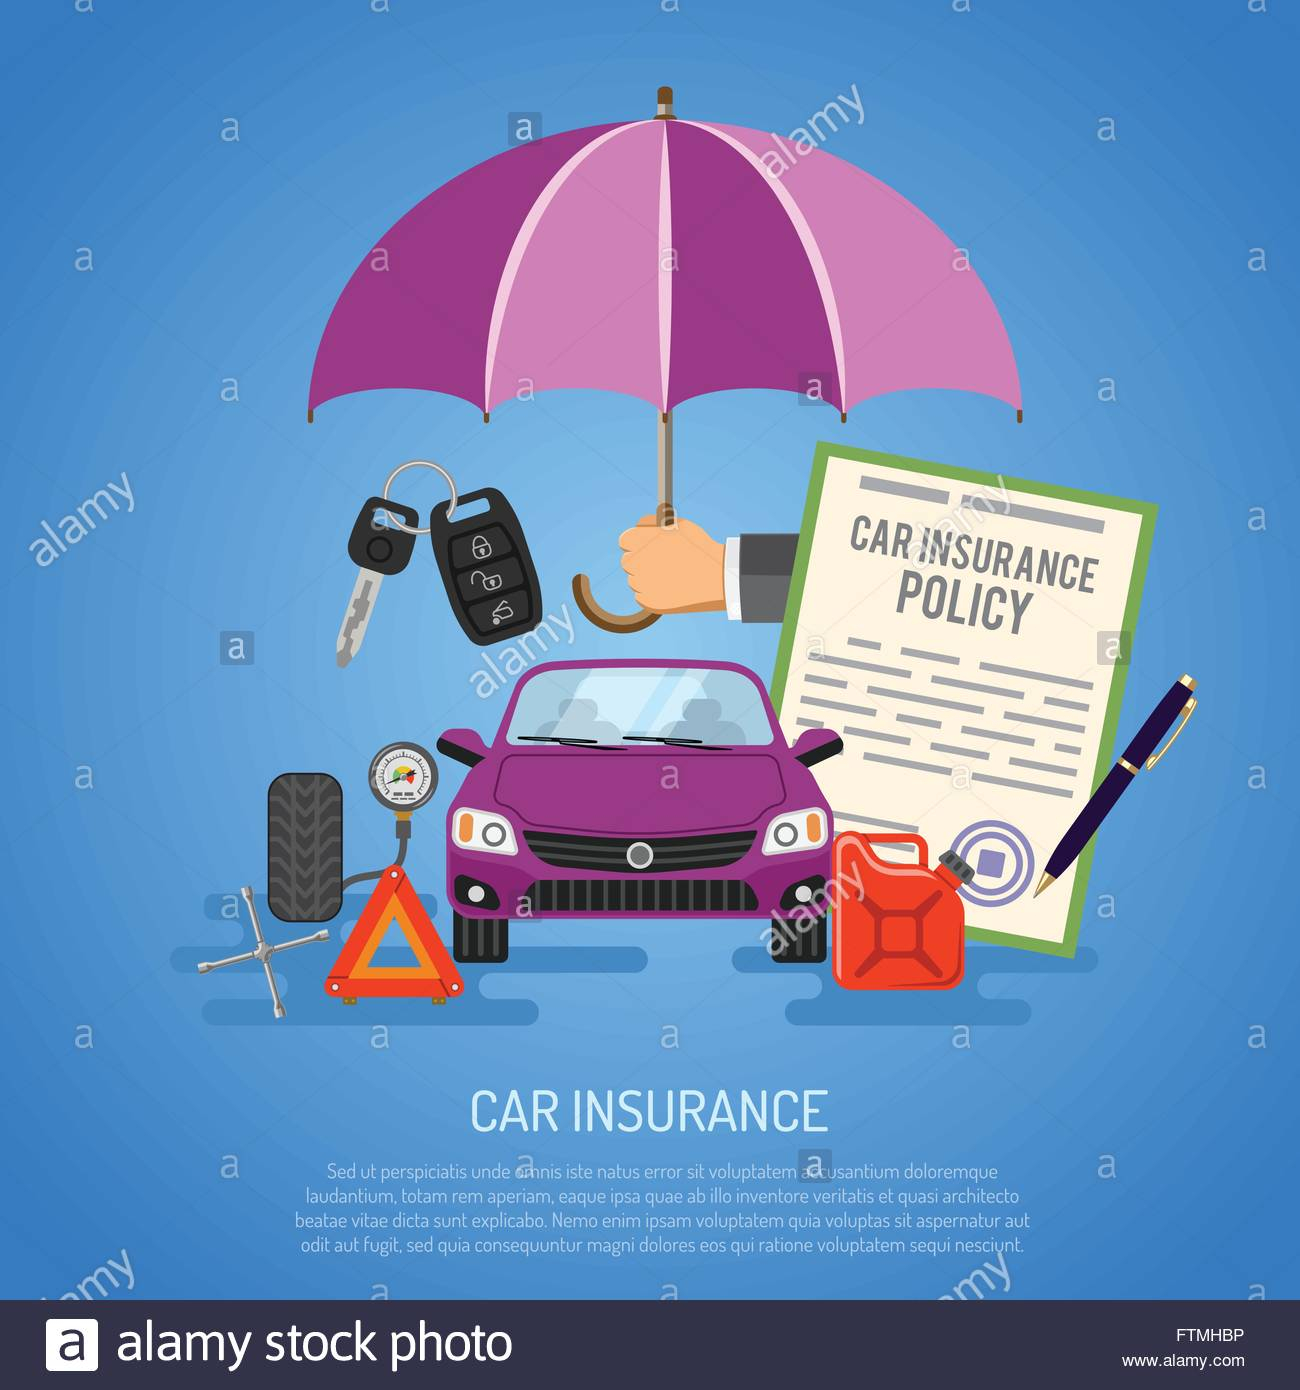 Car Insurance Concept Stock Vector Art Illustration within measurements 1300 X 1390